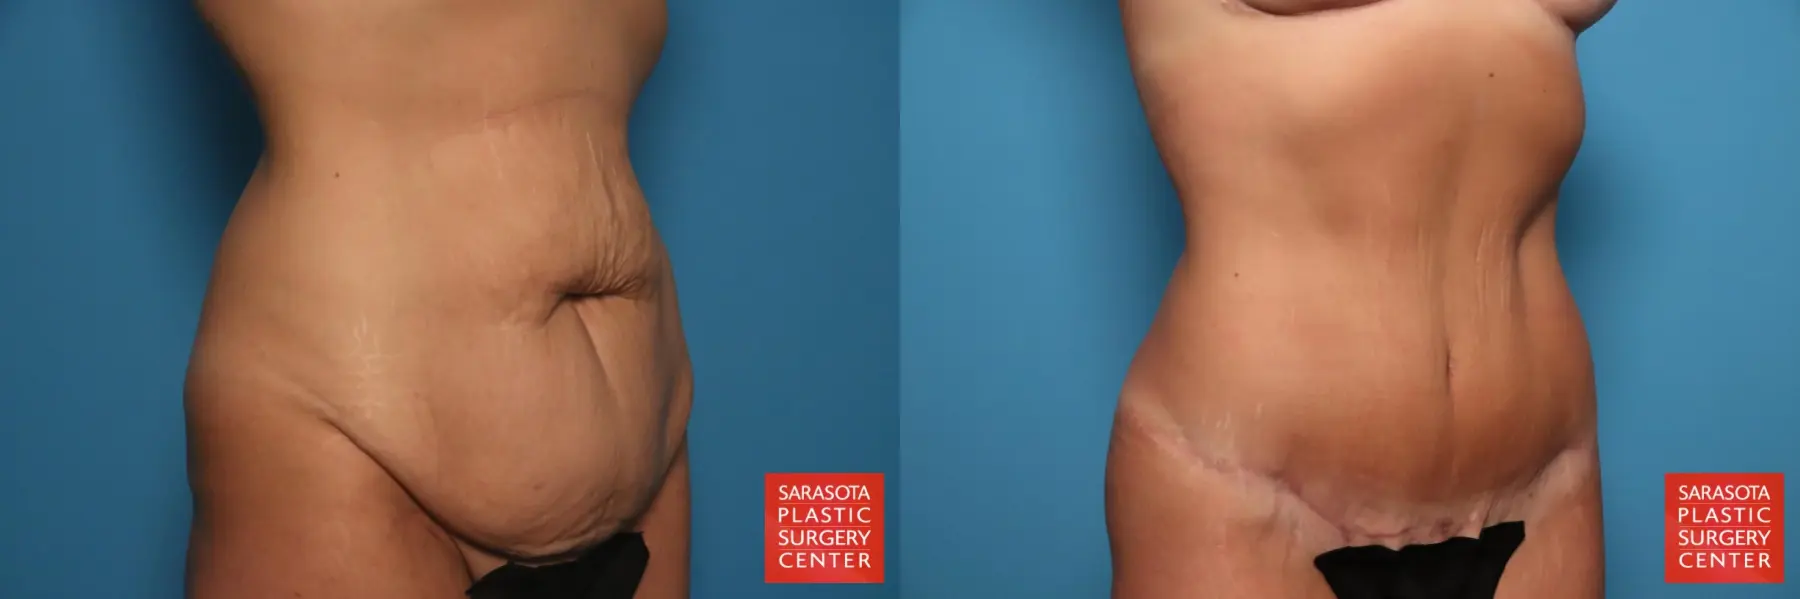 Tummy Tuck: Patient 26 - Before and After 2